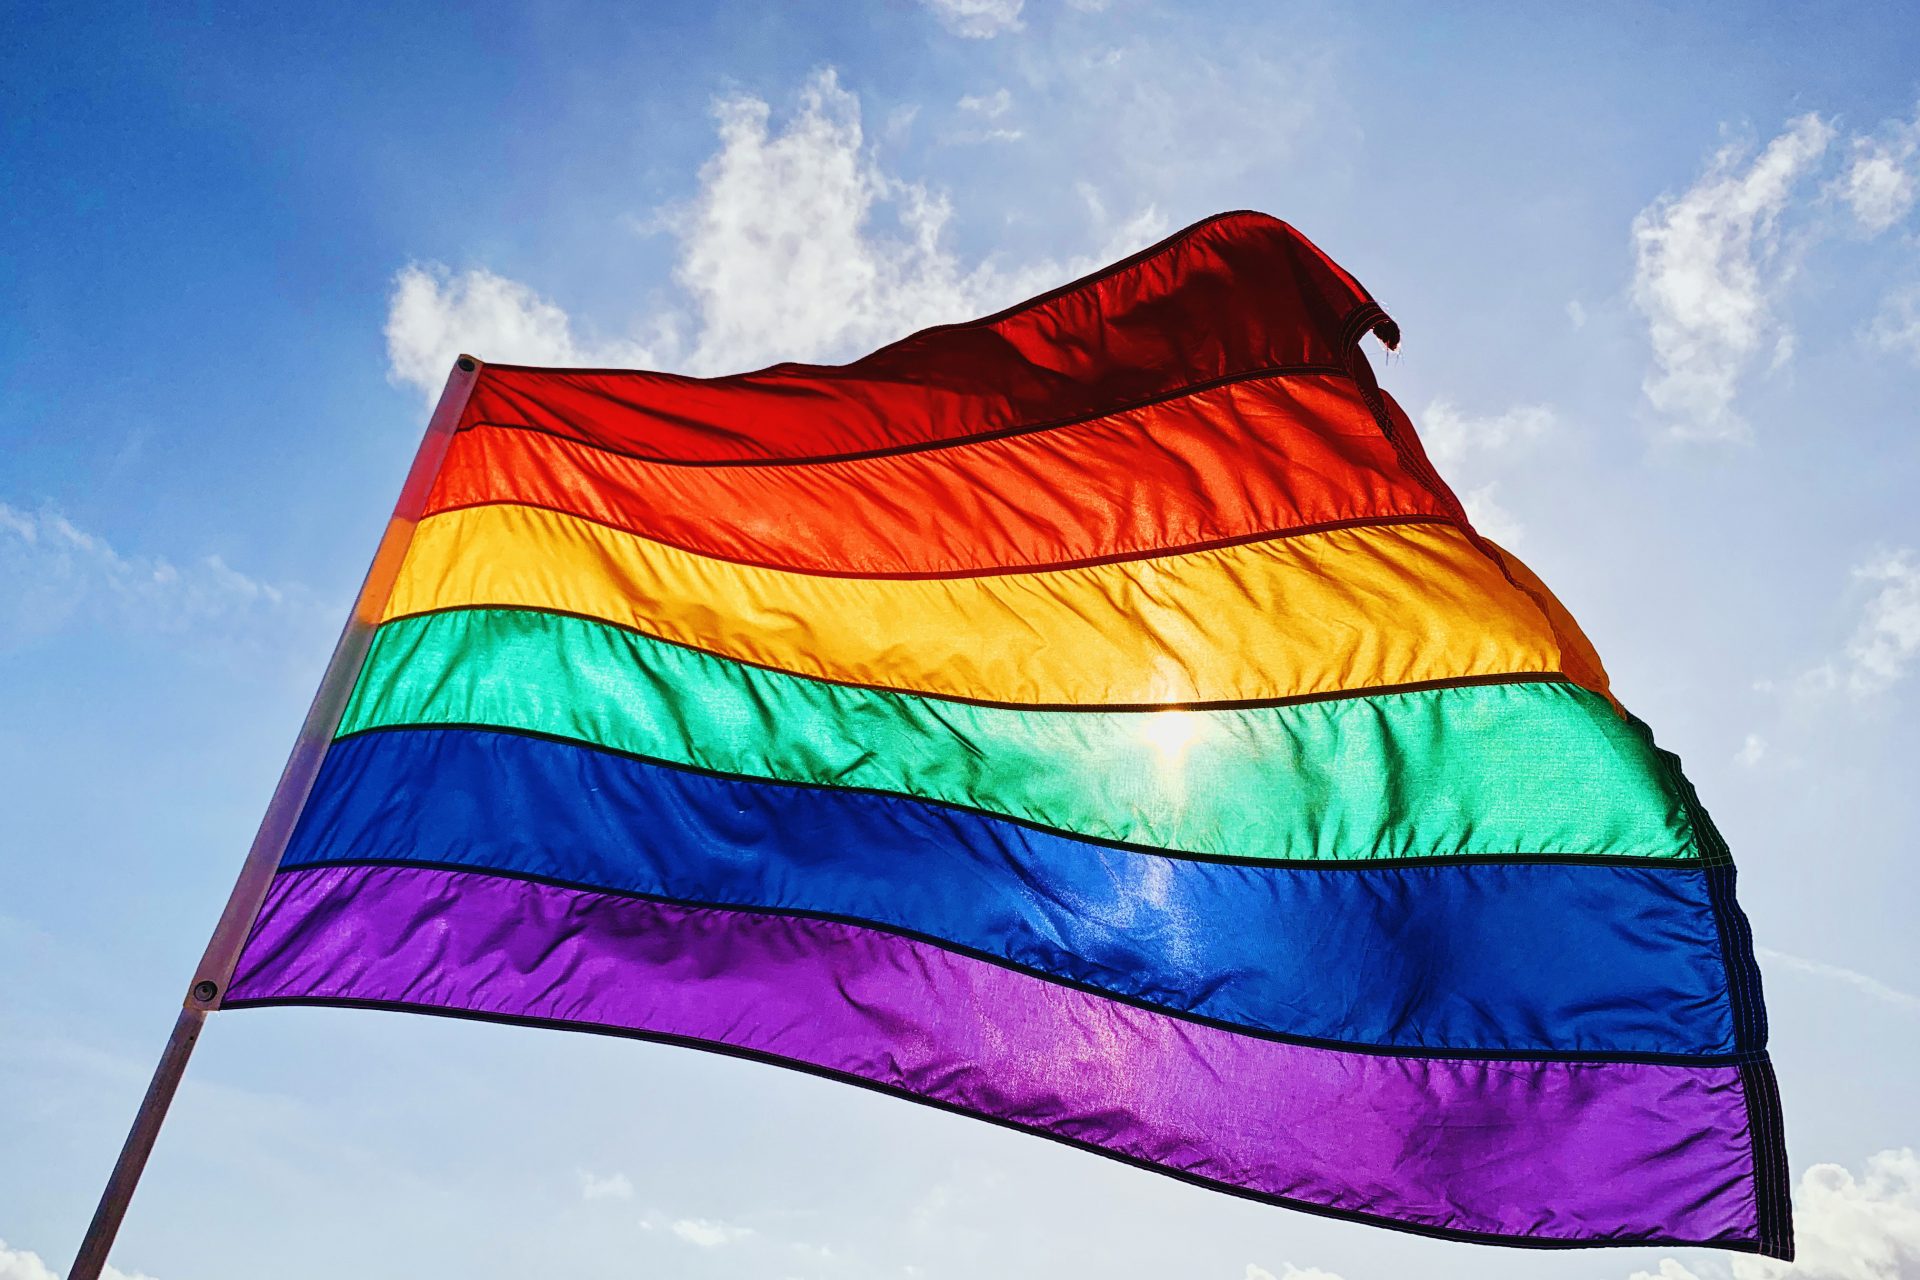 Safety and comfort for LGBTQ travelers in the USA